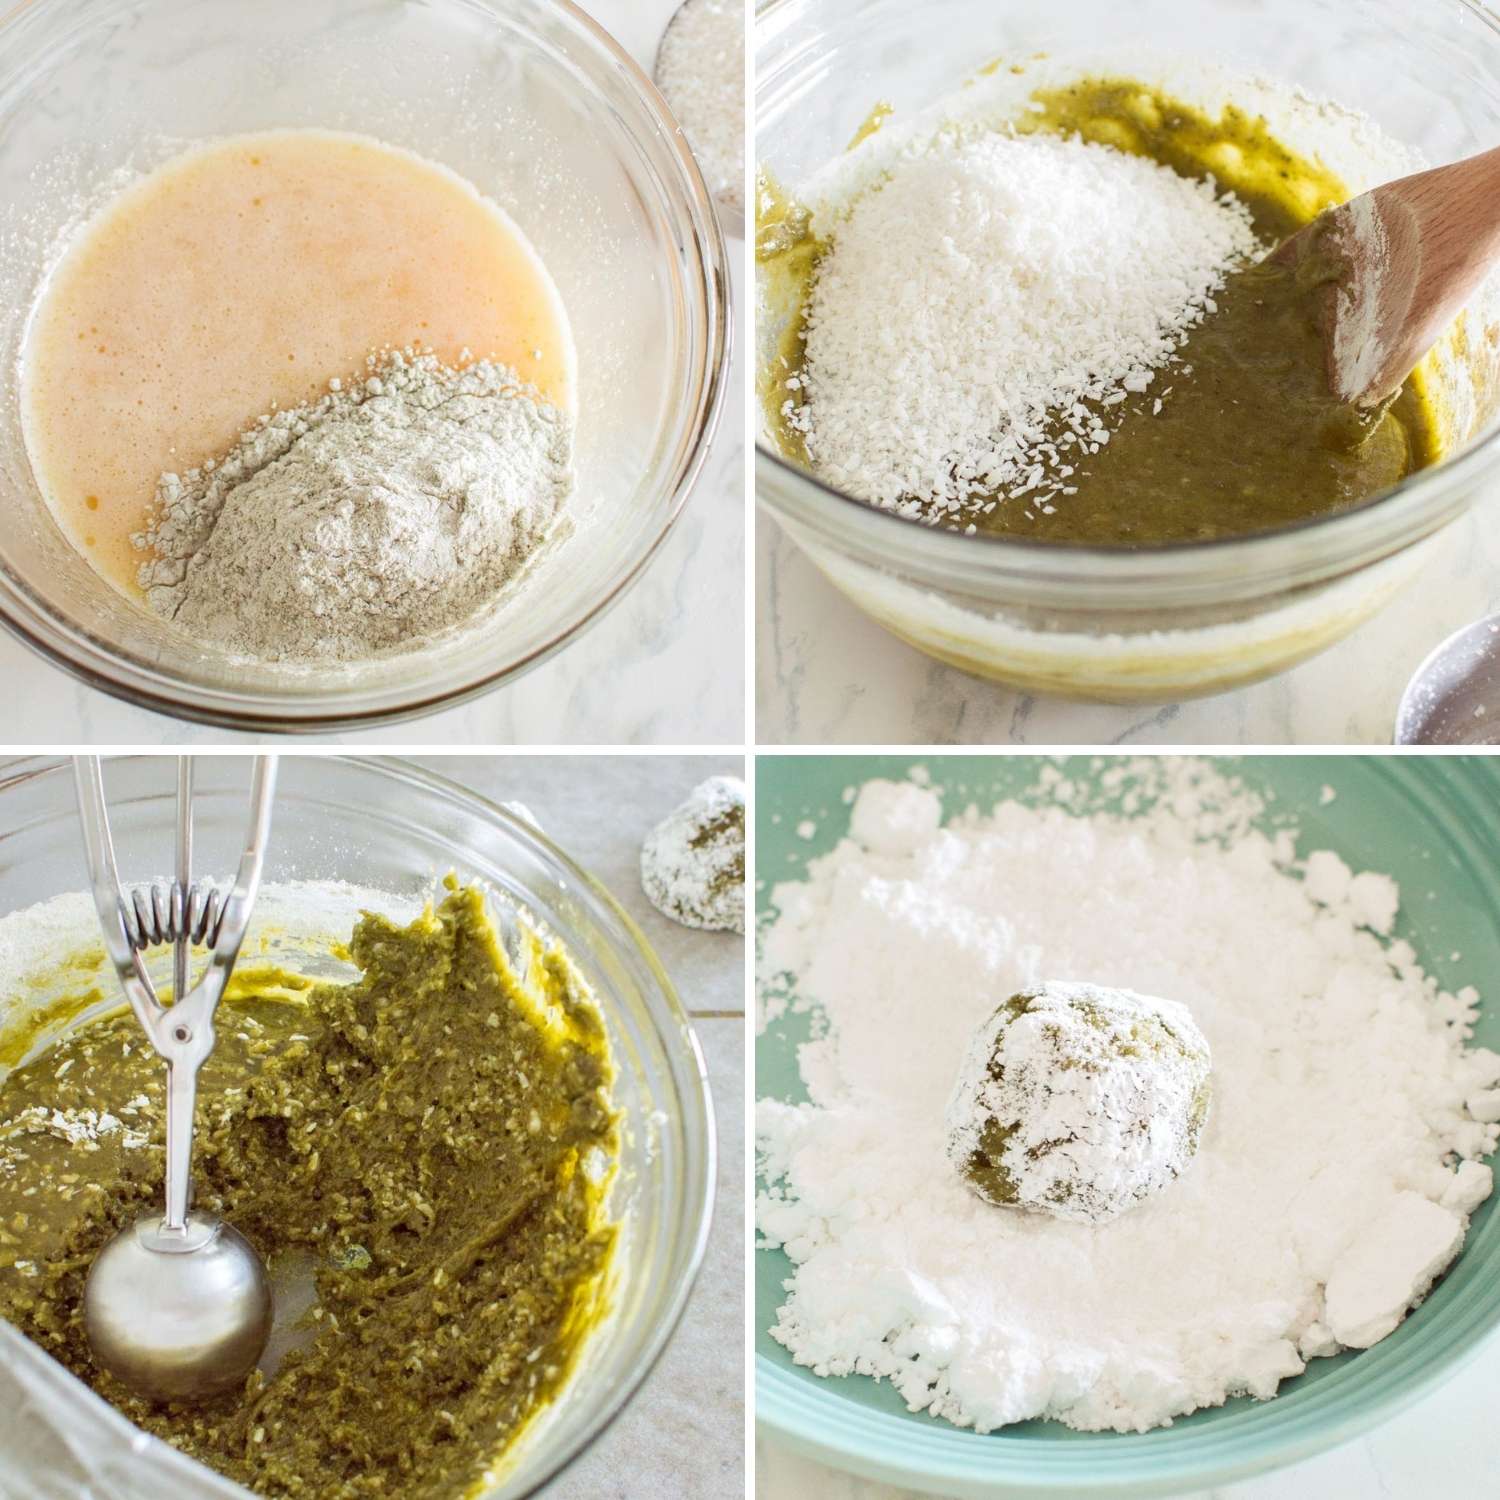 Collage of four images showing how to make matcha cookie dough and scoop out cookies